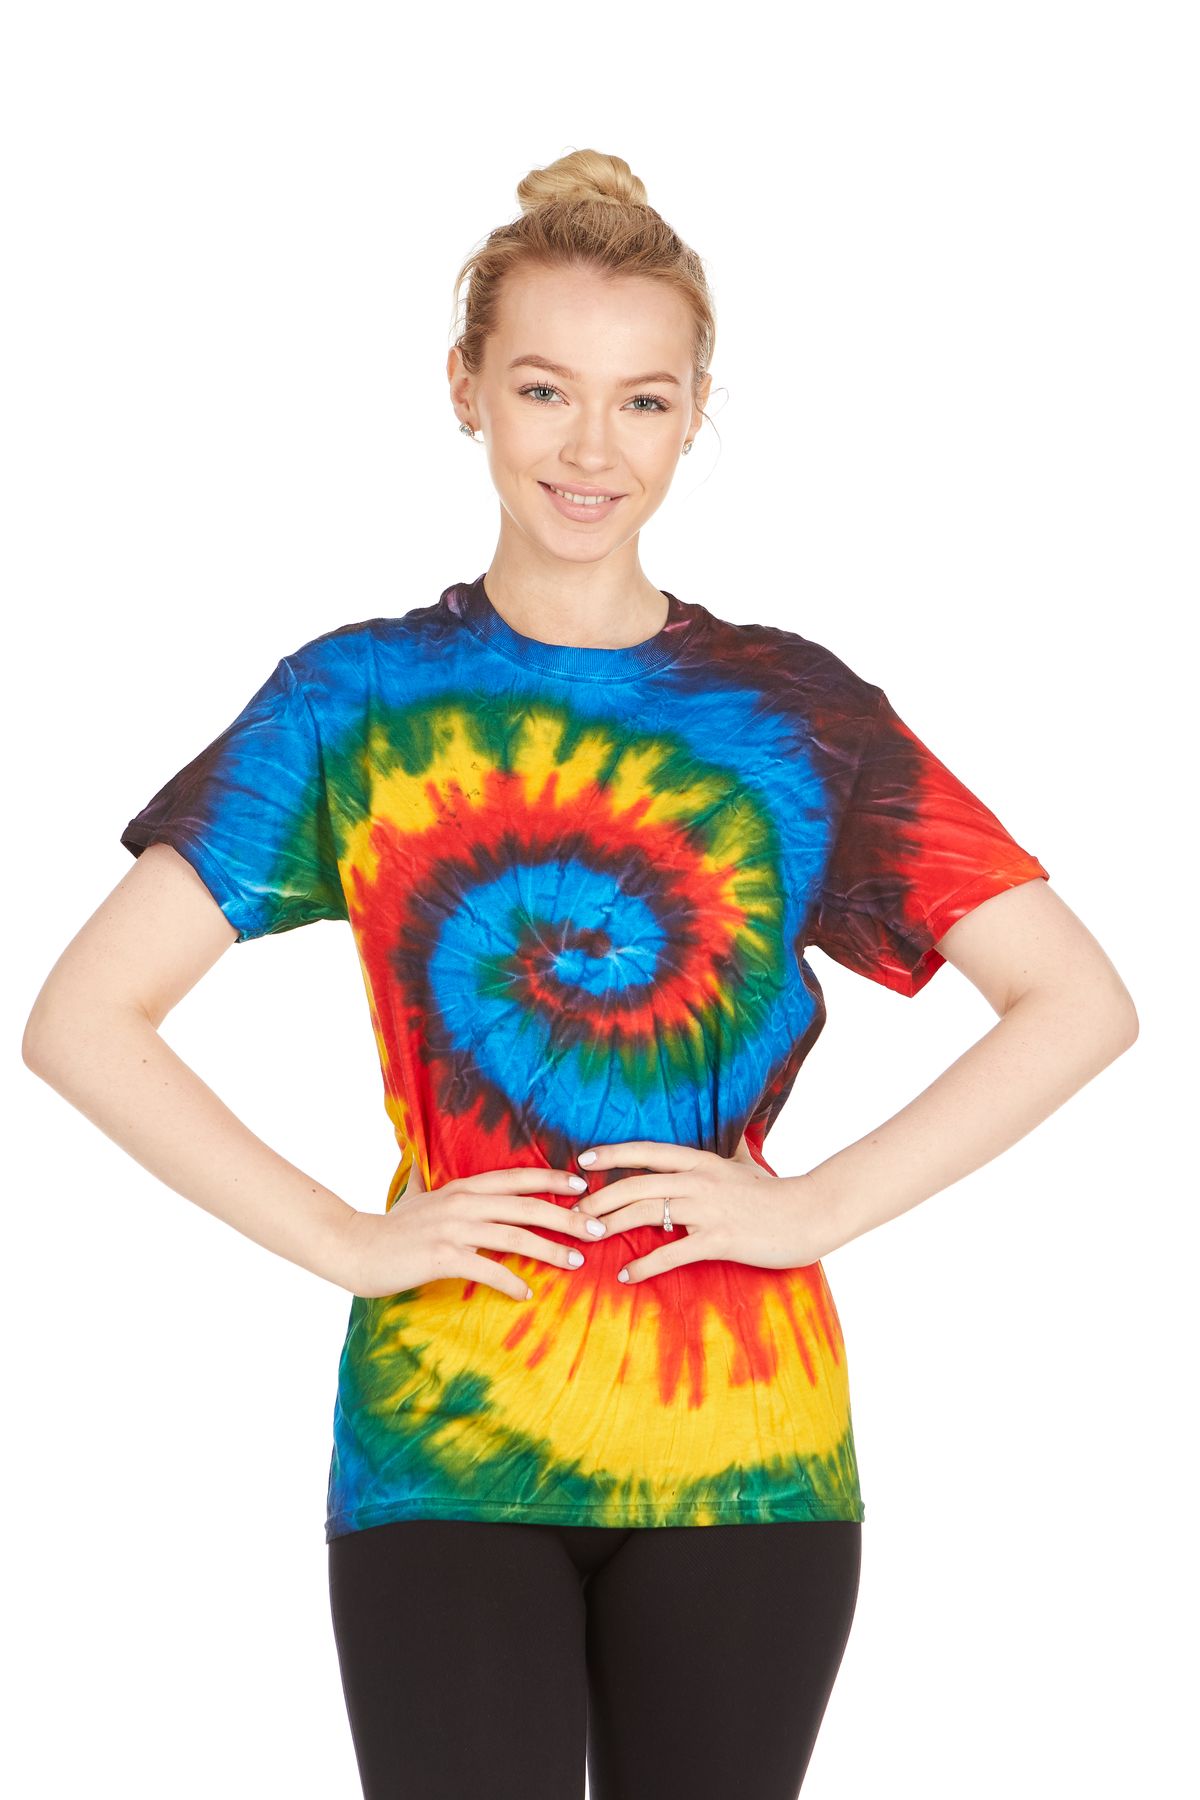 Tie Dye Style T-Shirts for Men and Women - Fun, Multi Color Tops by ...